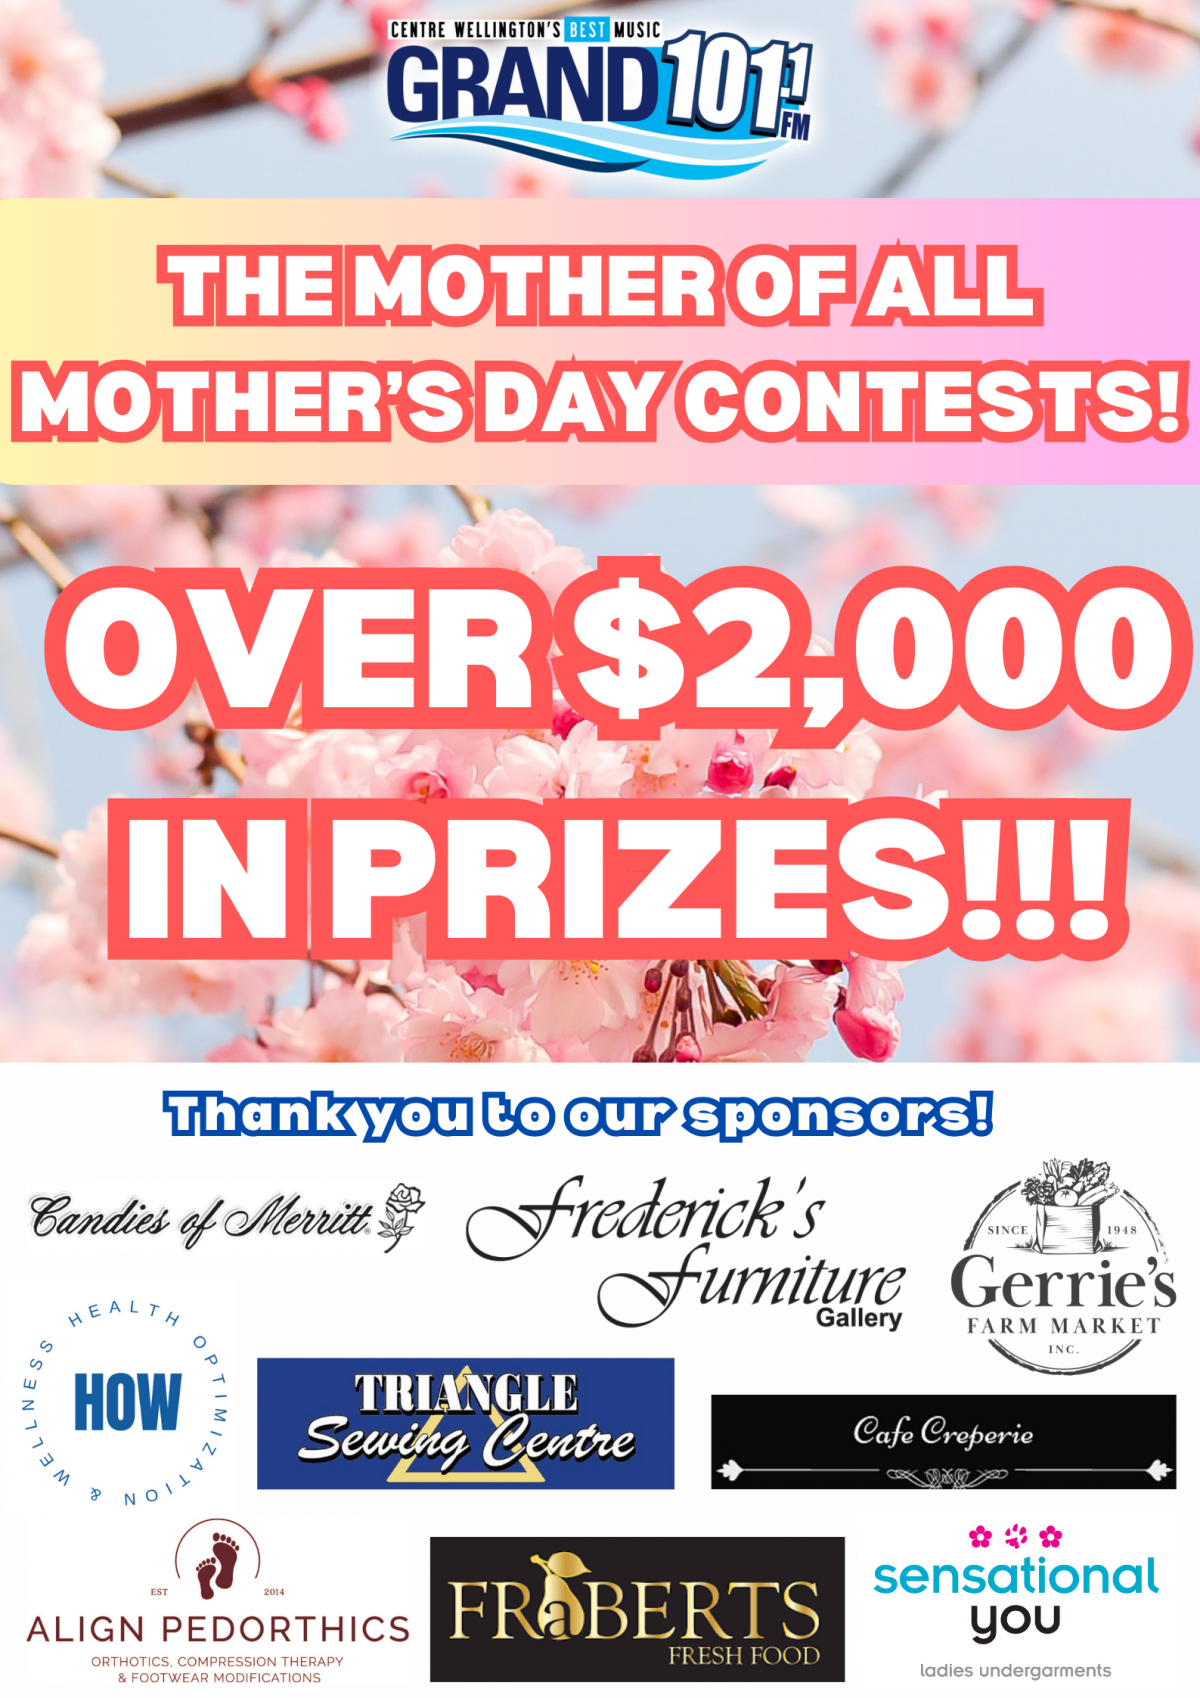 The Mother of all Mother's Day Contests!